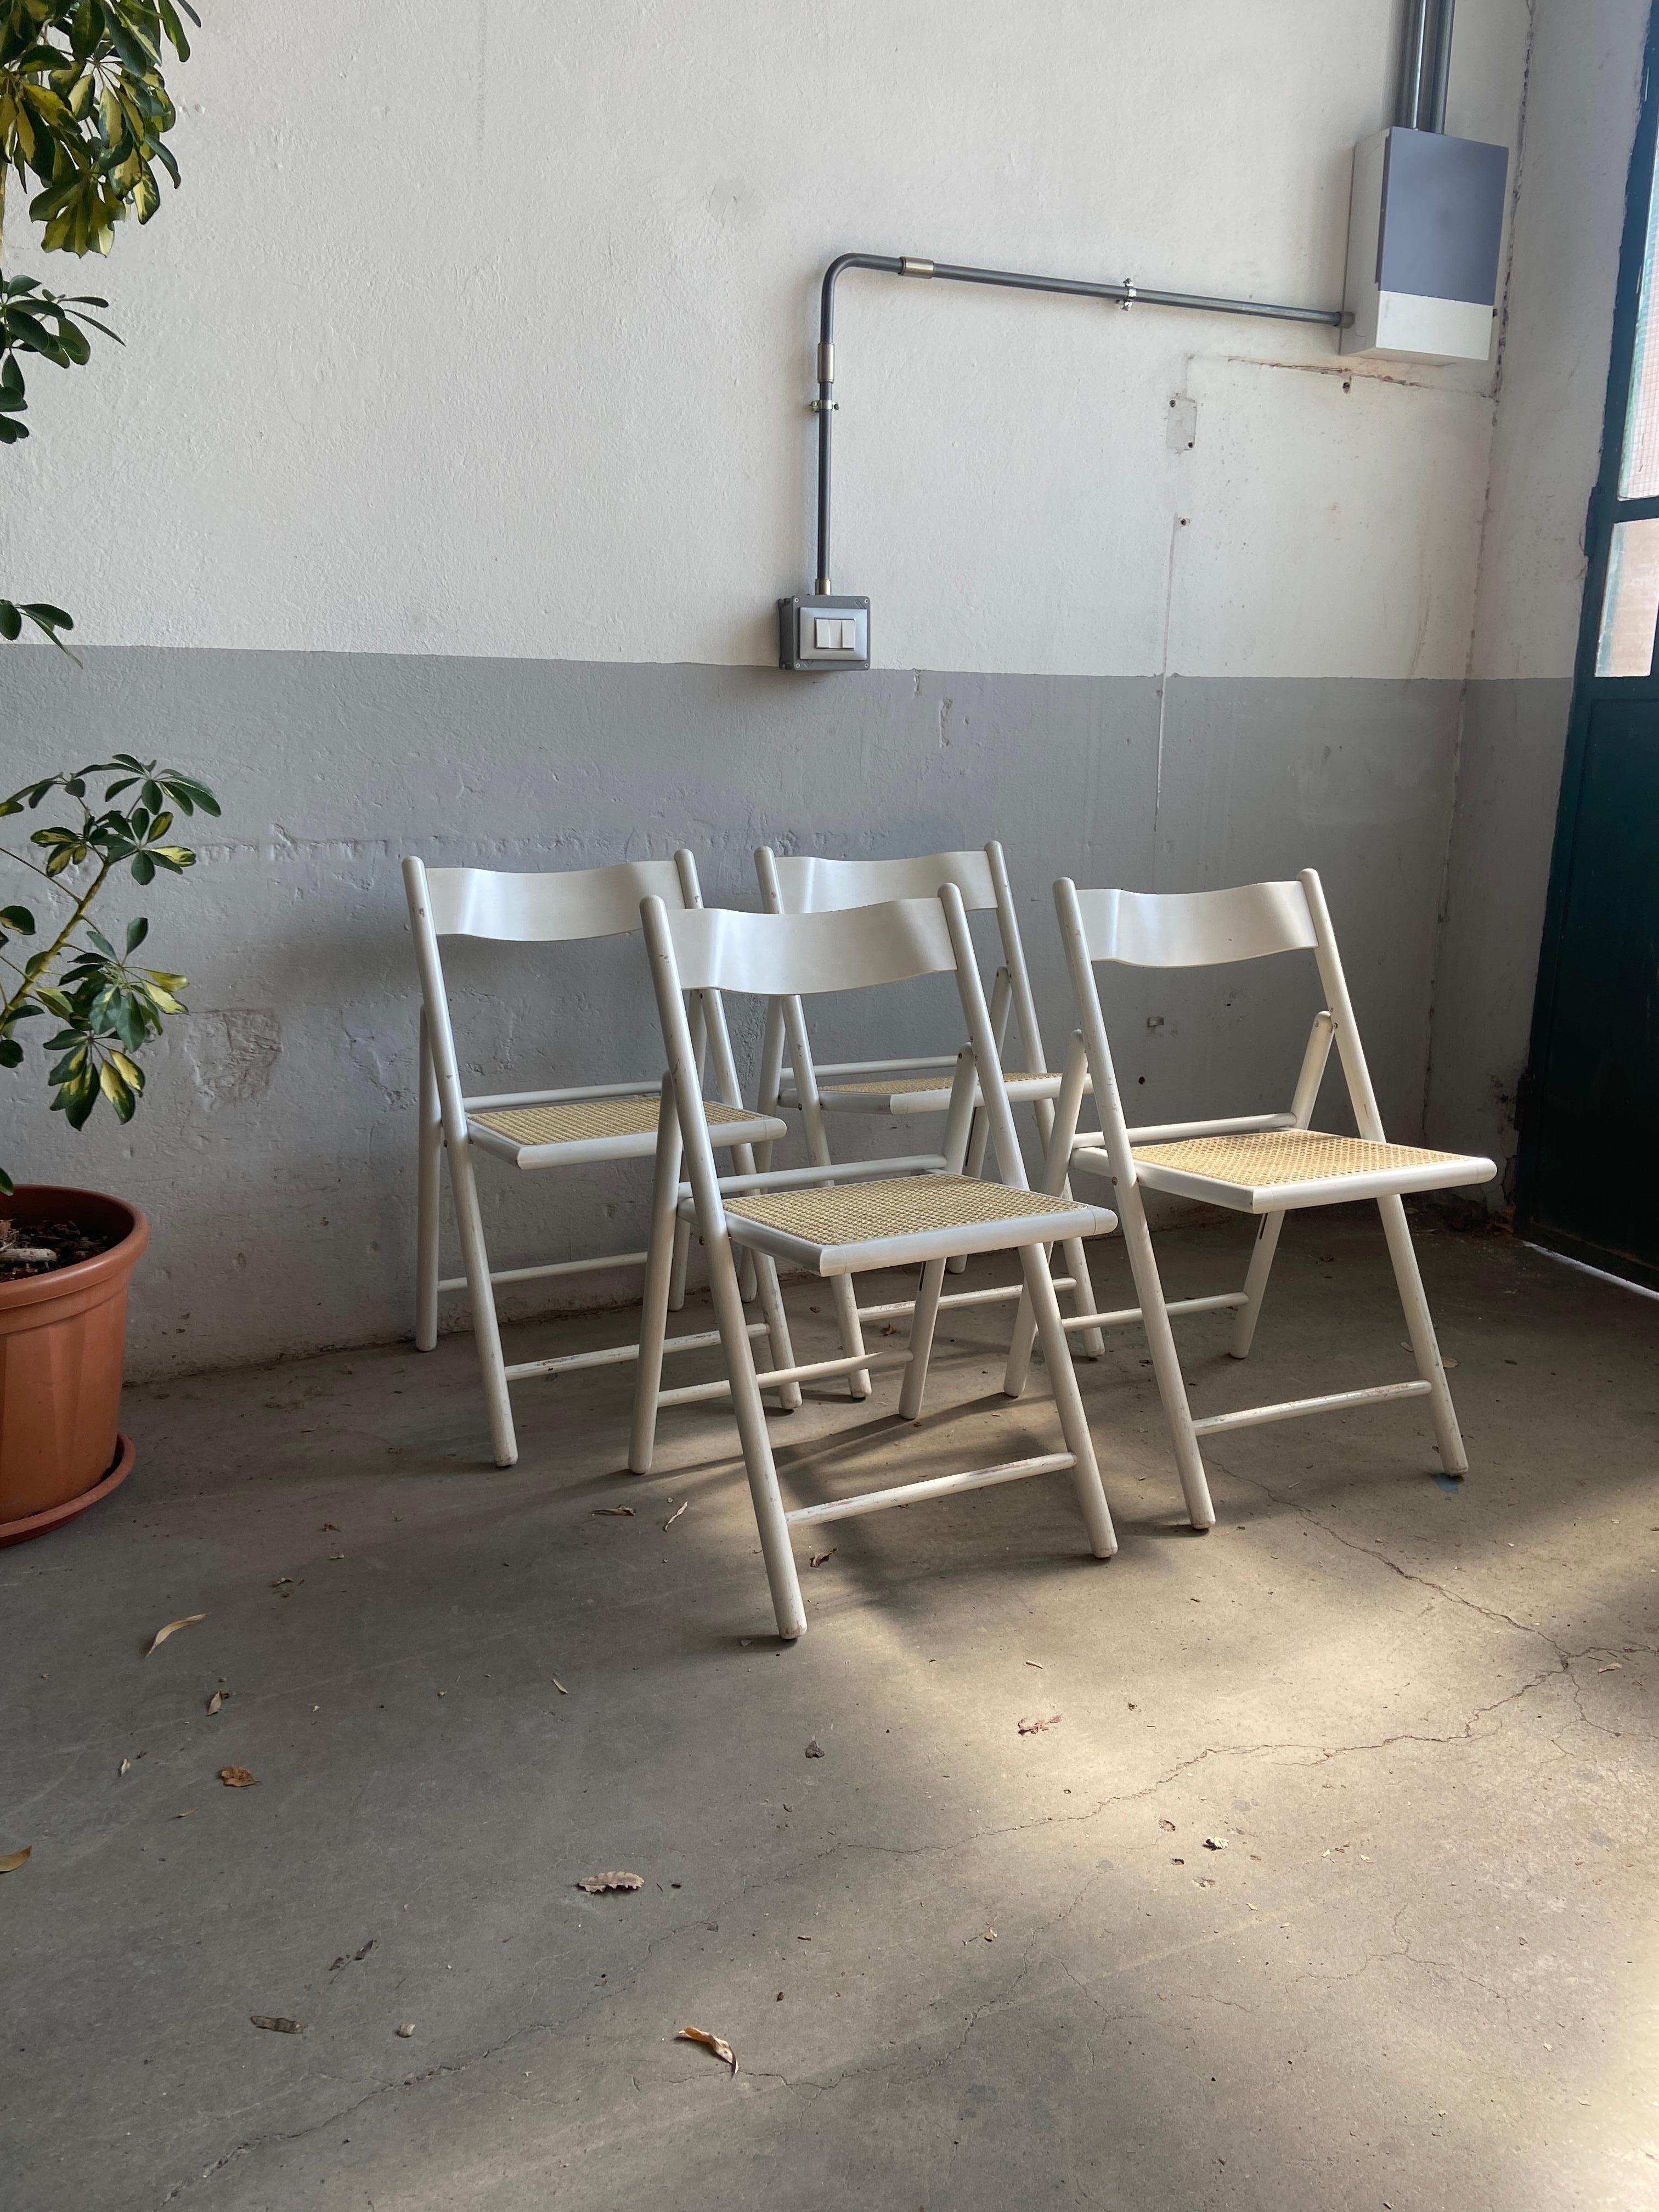 Late 20th Century Mid-Century Modern Italian Set of 4 Wooden Folding Chairs with Vienna Straw Seat